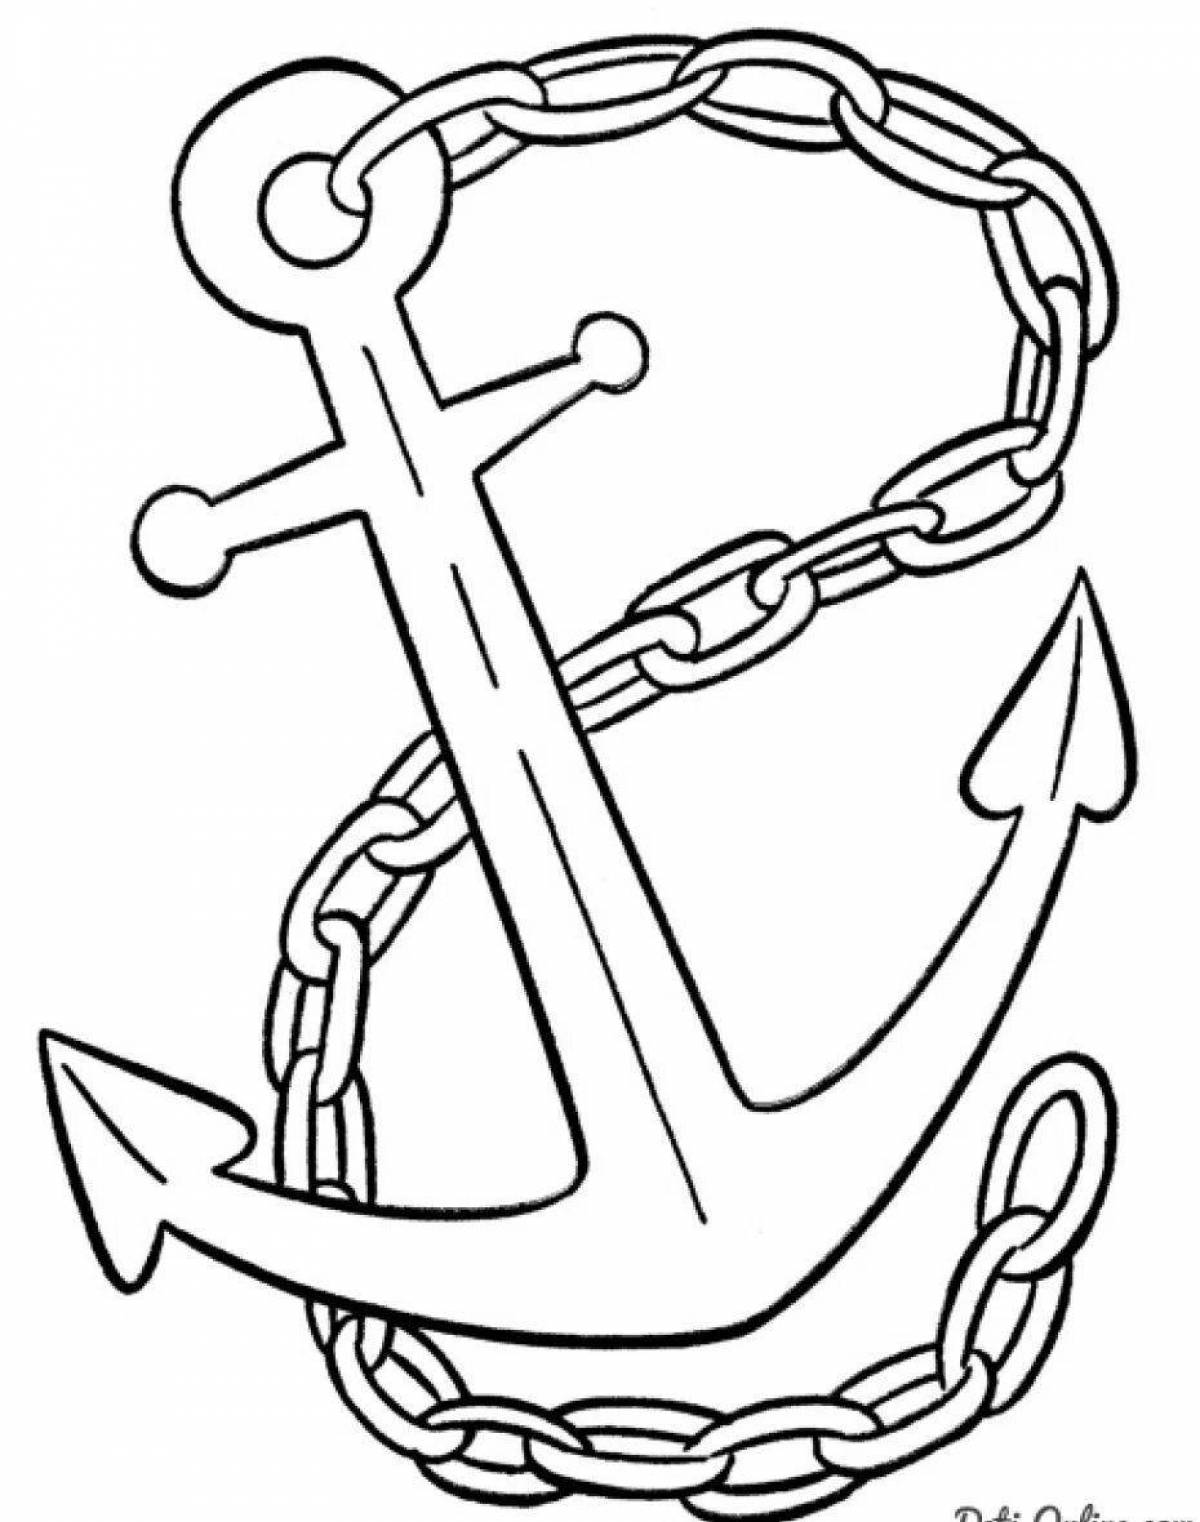 Adorable anchor coloring book for kids